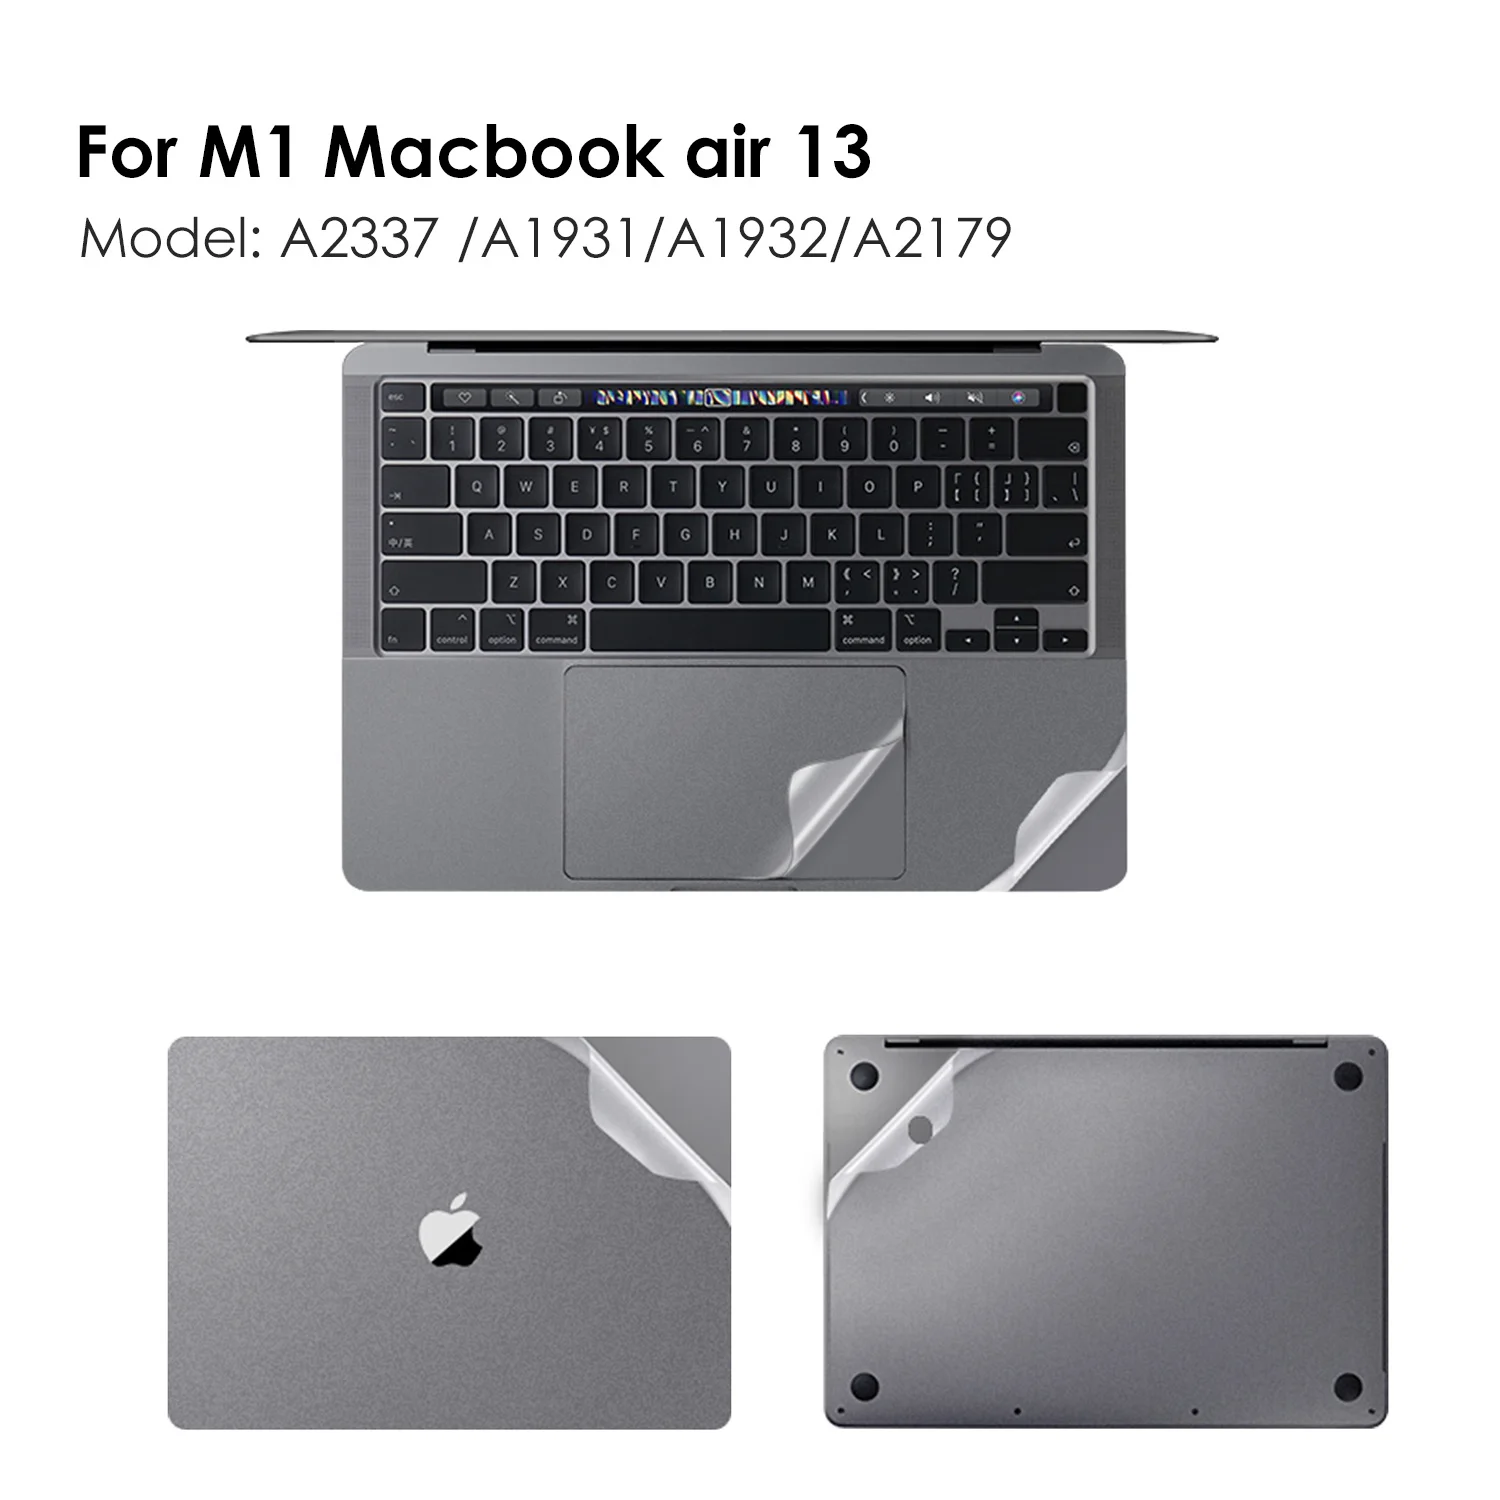 

Full Body Sticker for 2020 New M1 MacBook Air 13 model A2337, Include Top + Bottom + Touchpad + Palm Rest Skin Protective cover